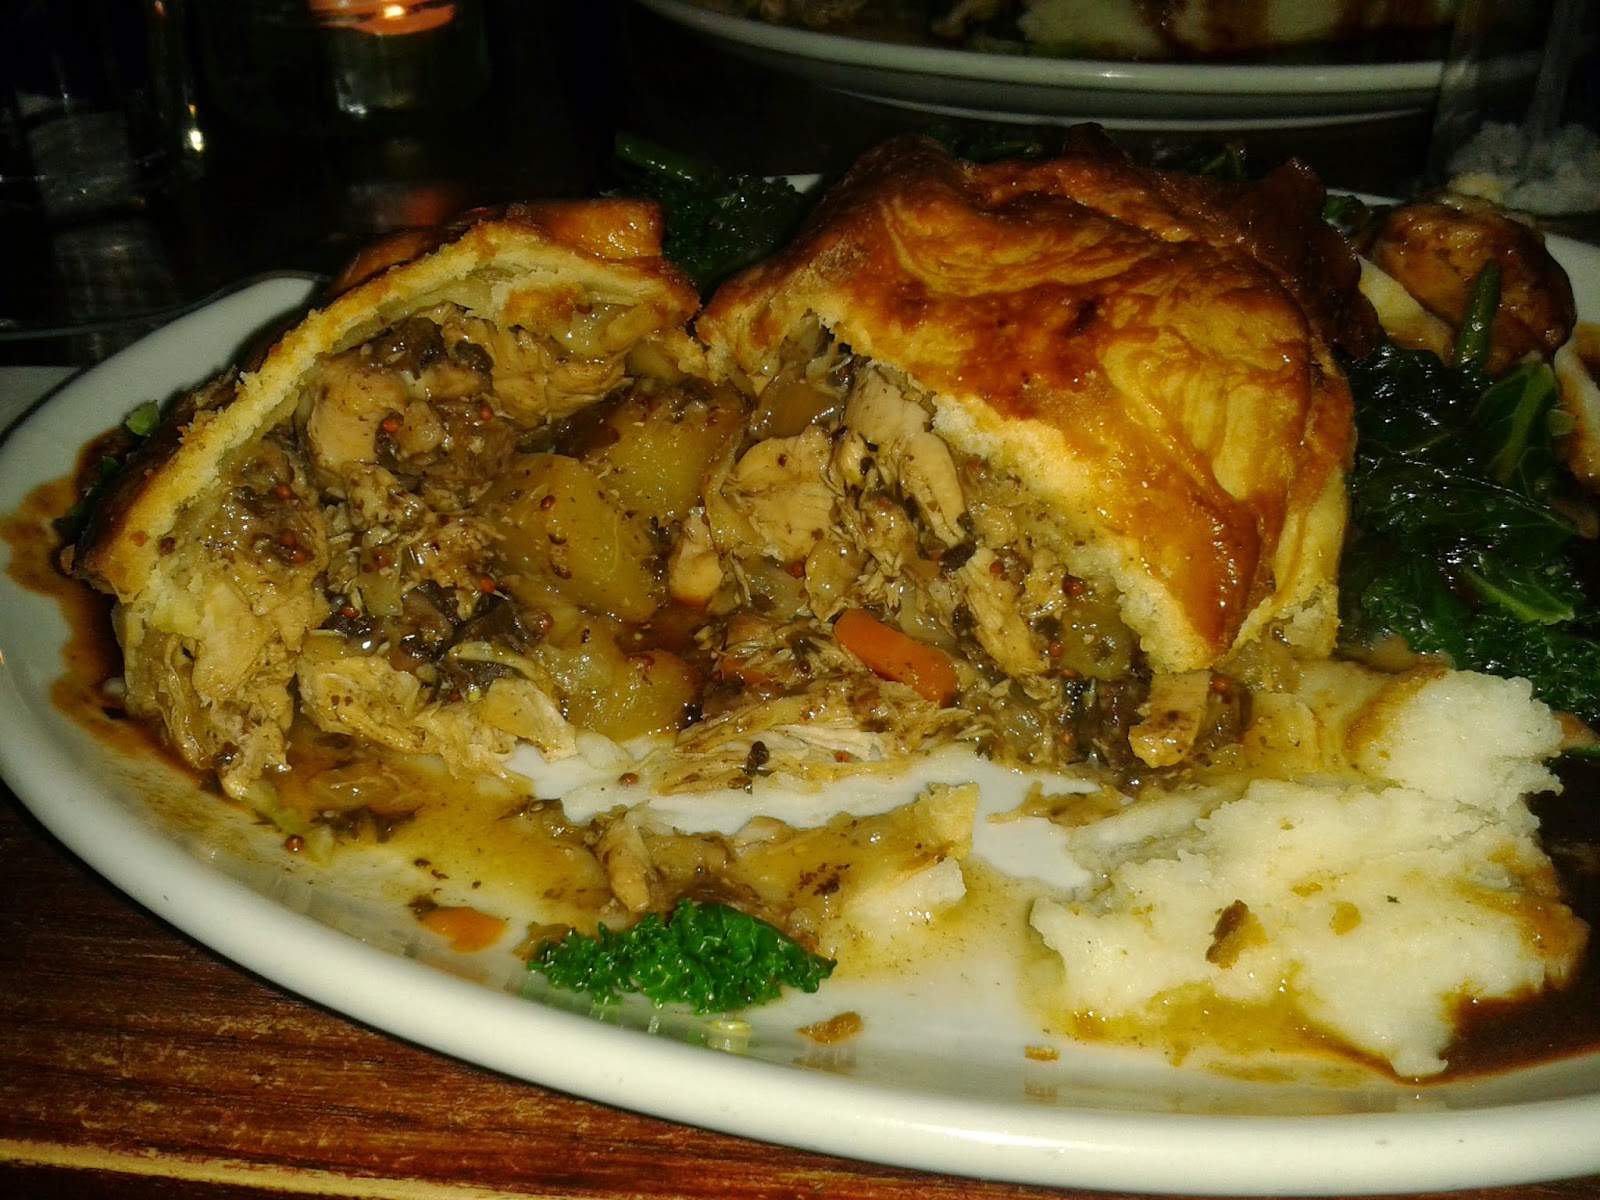 Punch Tavern Rabbit Pie Review